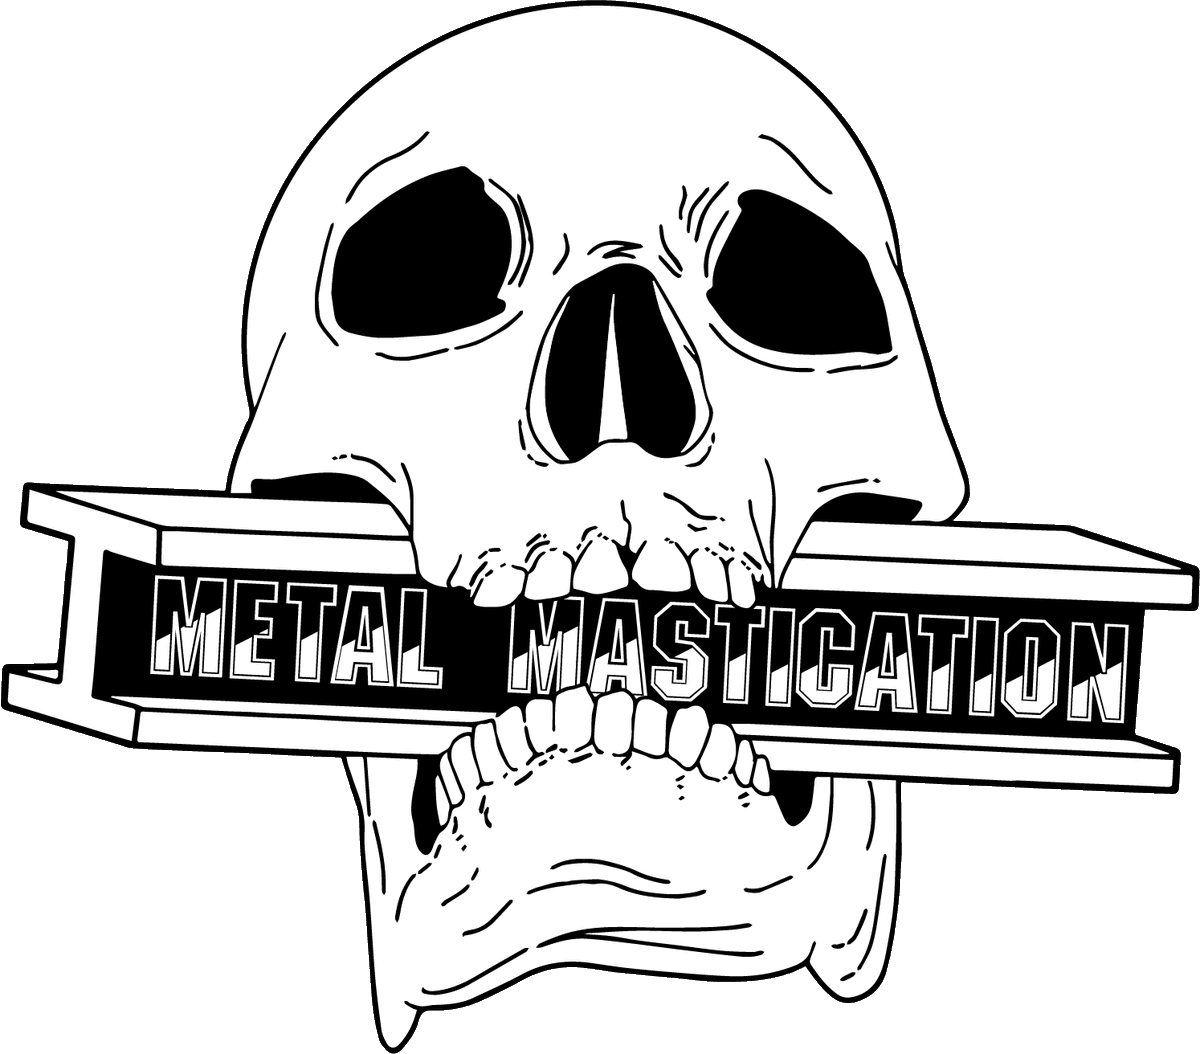 Logo contest between James & Rose Here is Rose's entry Rose is a recent graduate of Otis College of Art & Design here in Los Angeles What do you think? LMK!
#heartofhollywoodmagazine
#metalmastication
Drawn by: Isabella 'Rose' Ghazarian